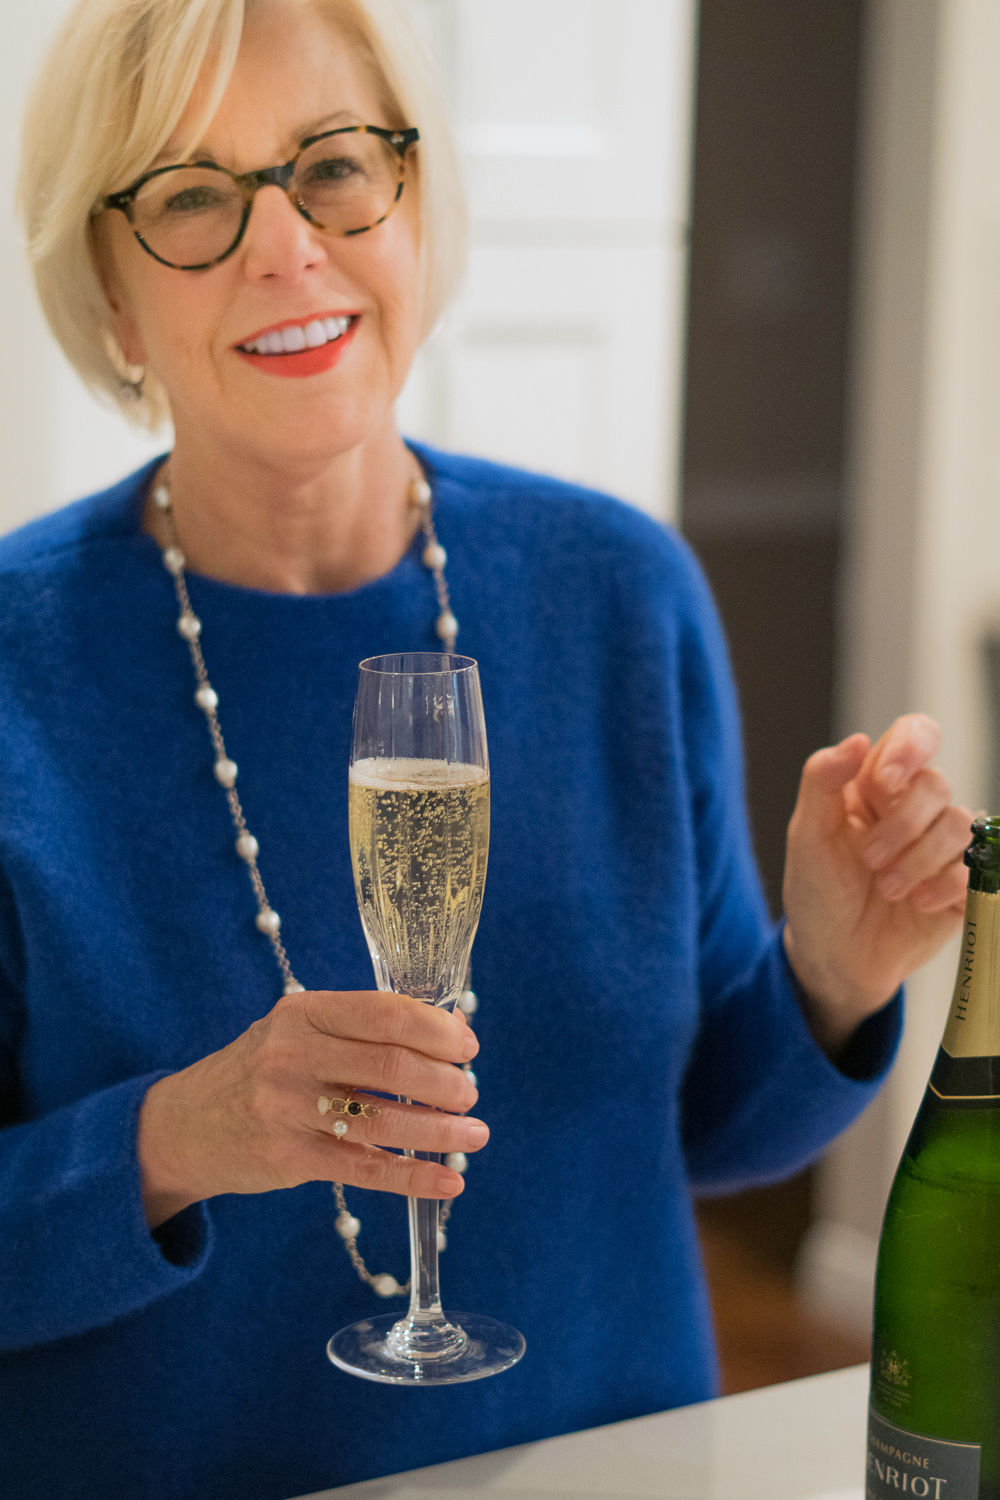 Style blogger Susan B. wearing a blue EILEEN FISHER sweater, silver and pearl necklace, and toasting the holidays with a glass of champagne. More at une femme d'un certain age.